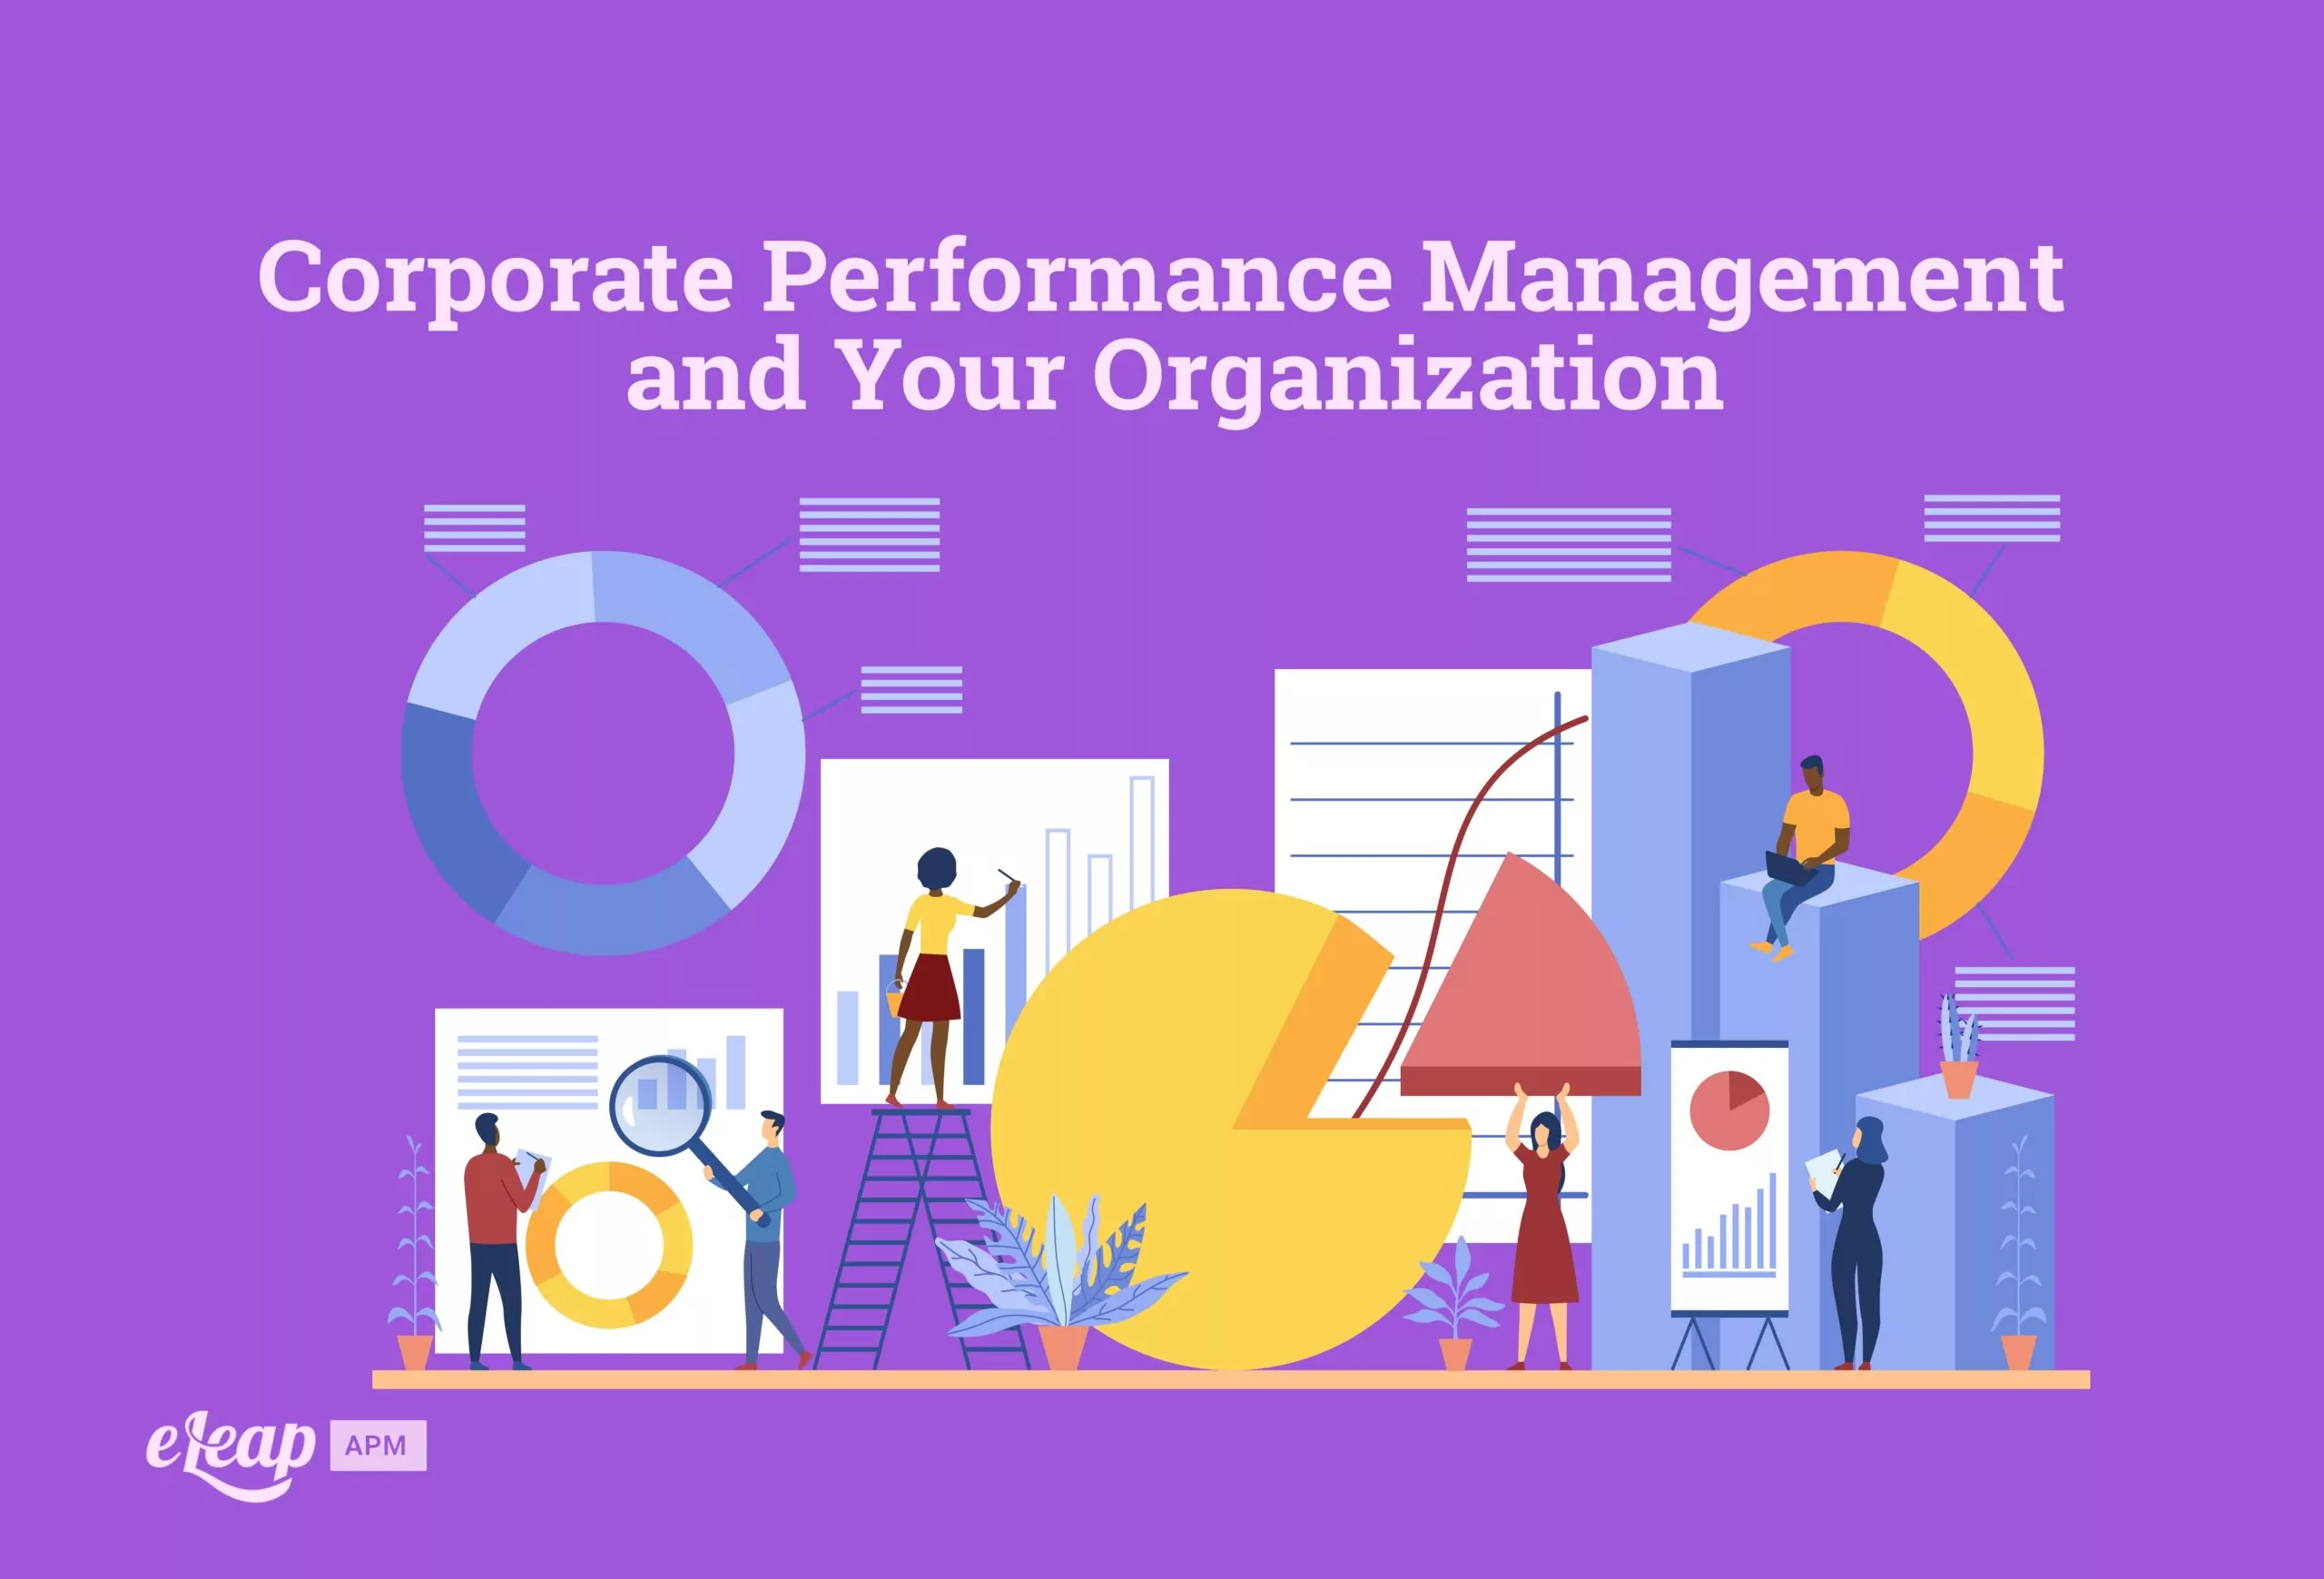 Corporate Performance Management and Your Organization